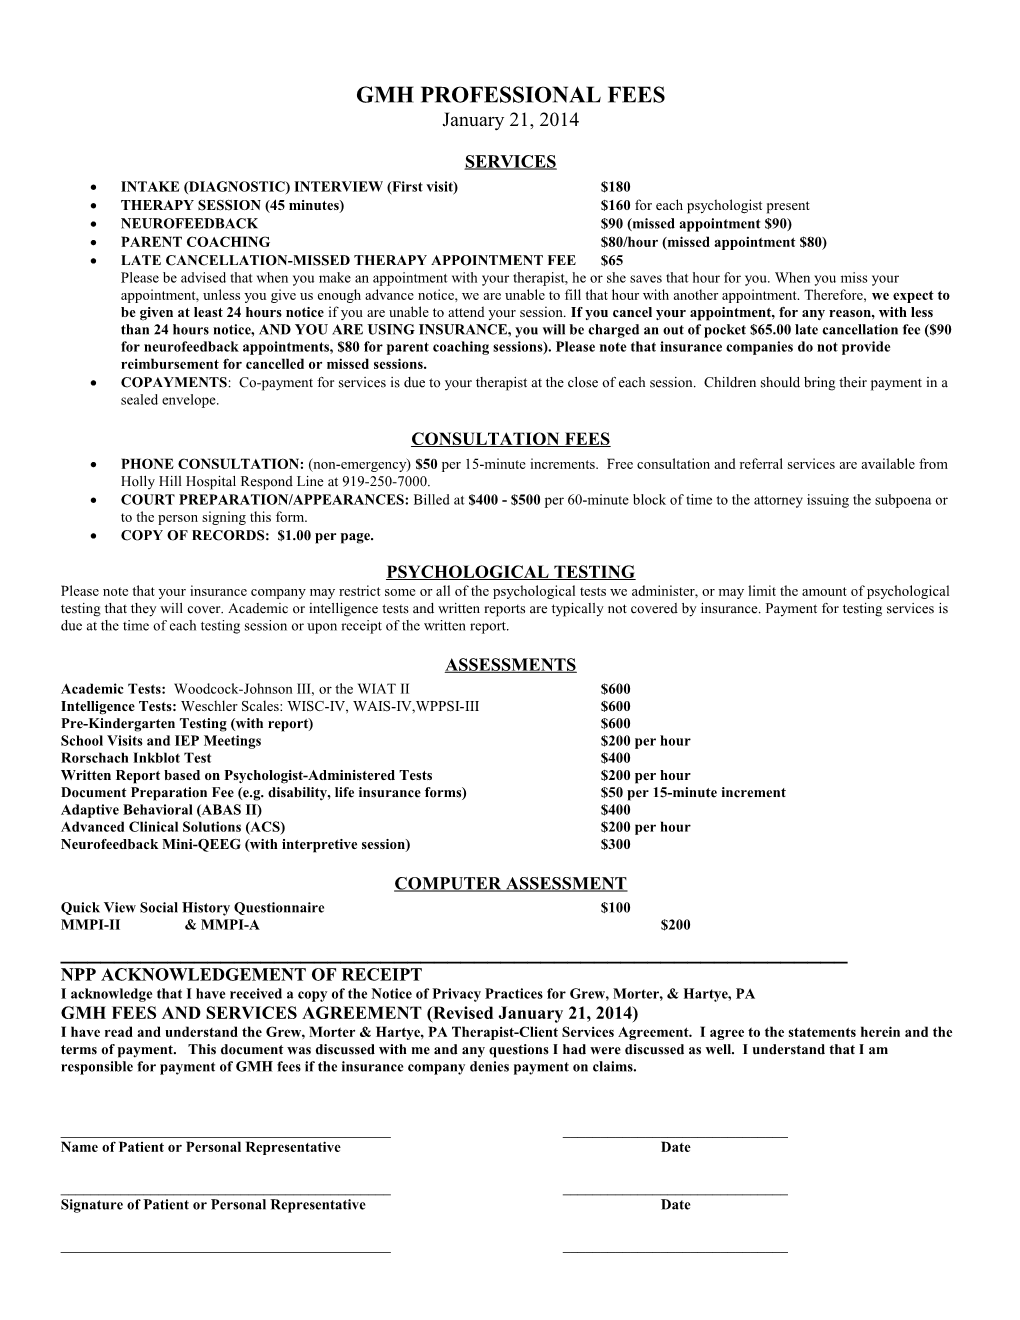 INTAKE (DIAGNOSTIC) INTERVIEW (First Visit) $180